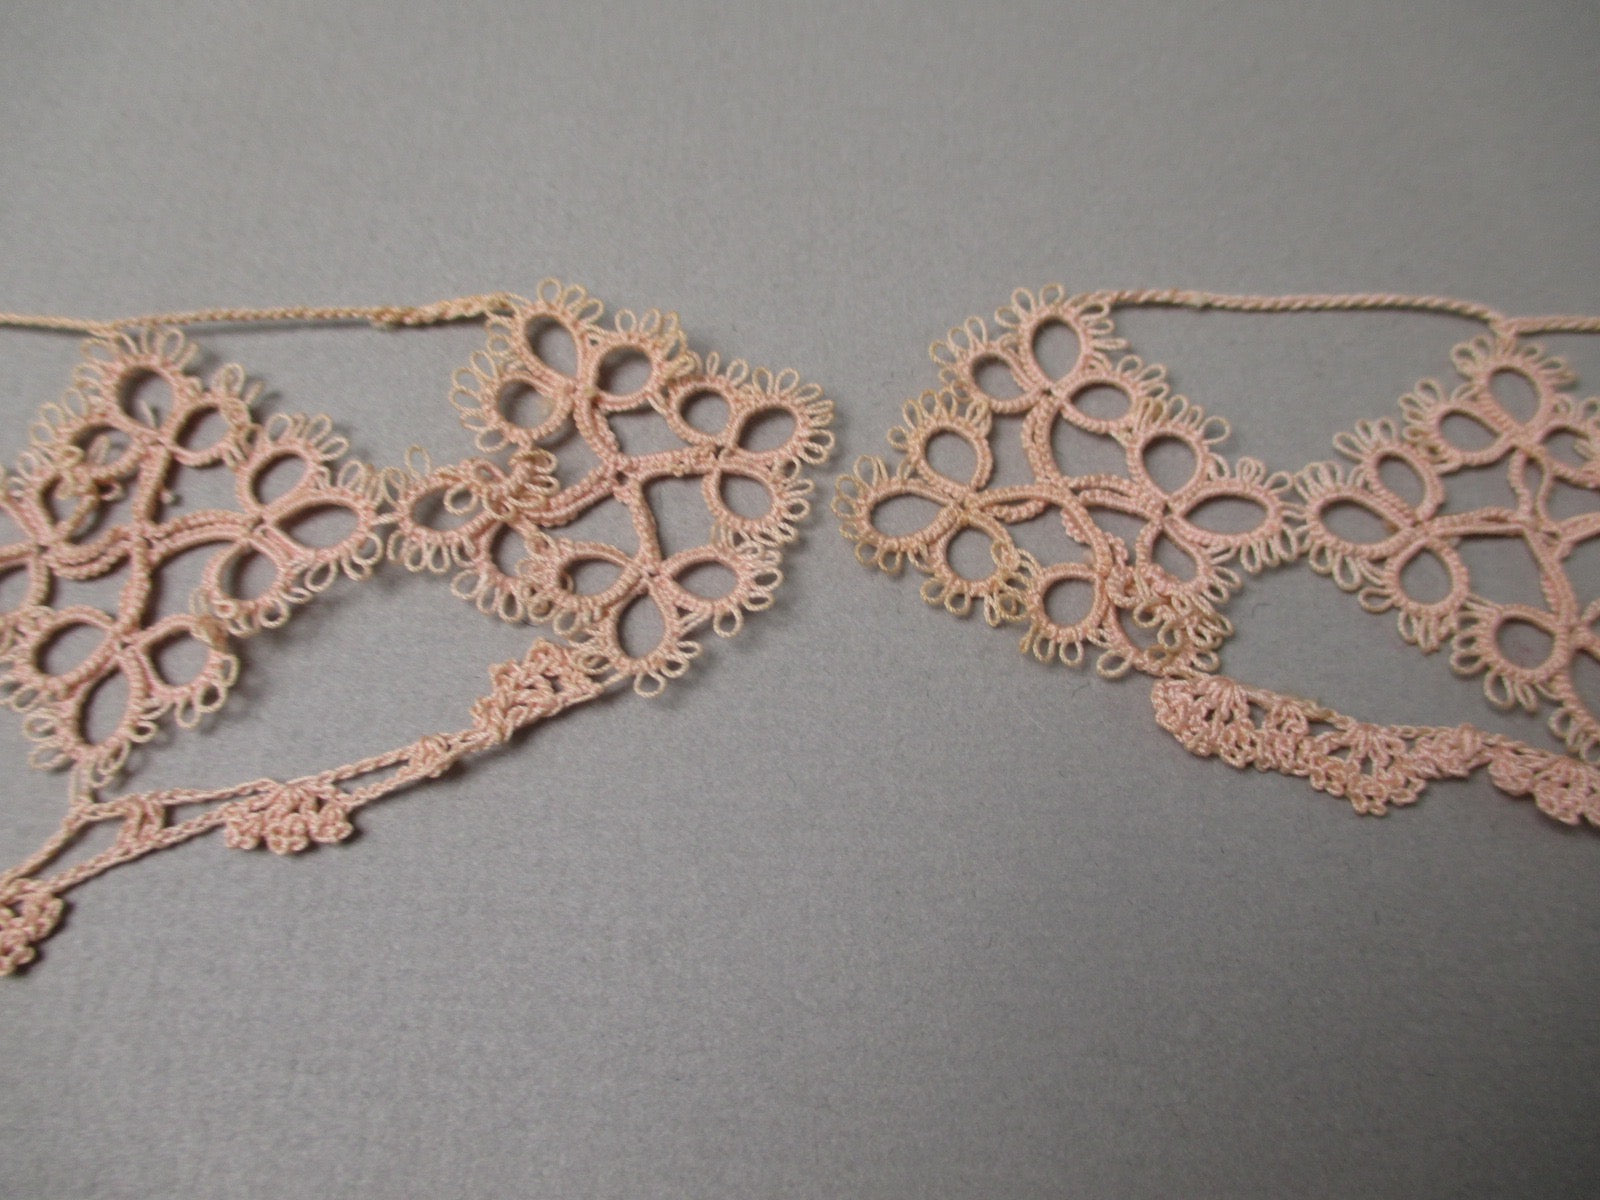 Vintage 1920s antique tatted lace collar